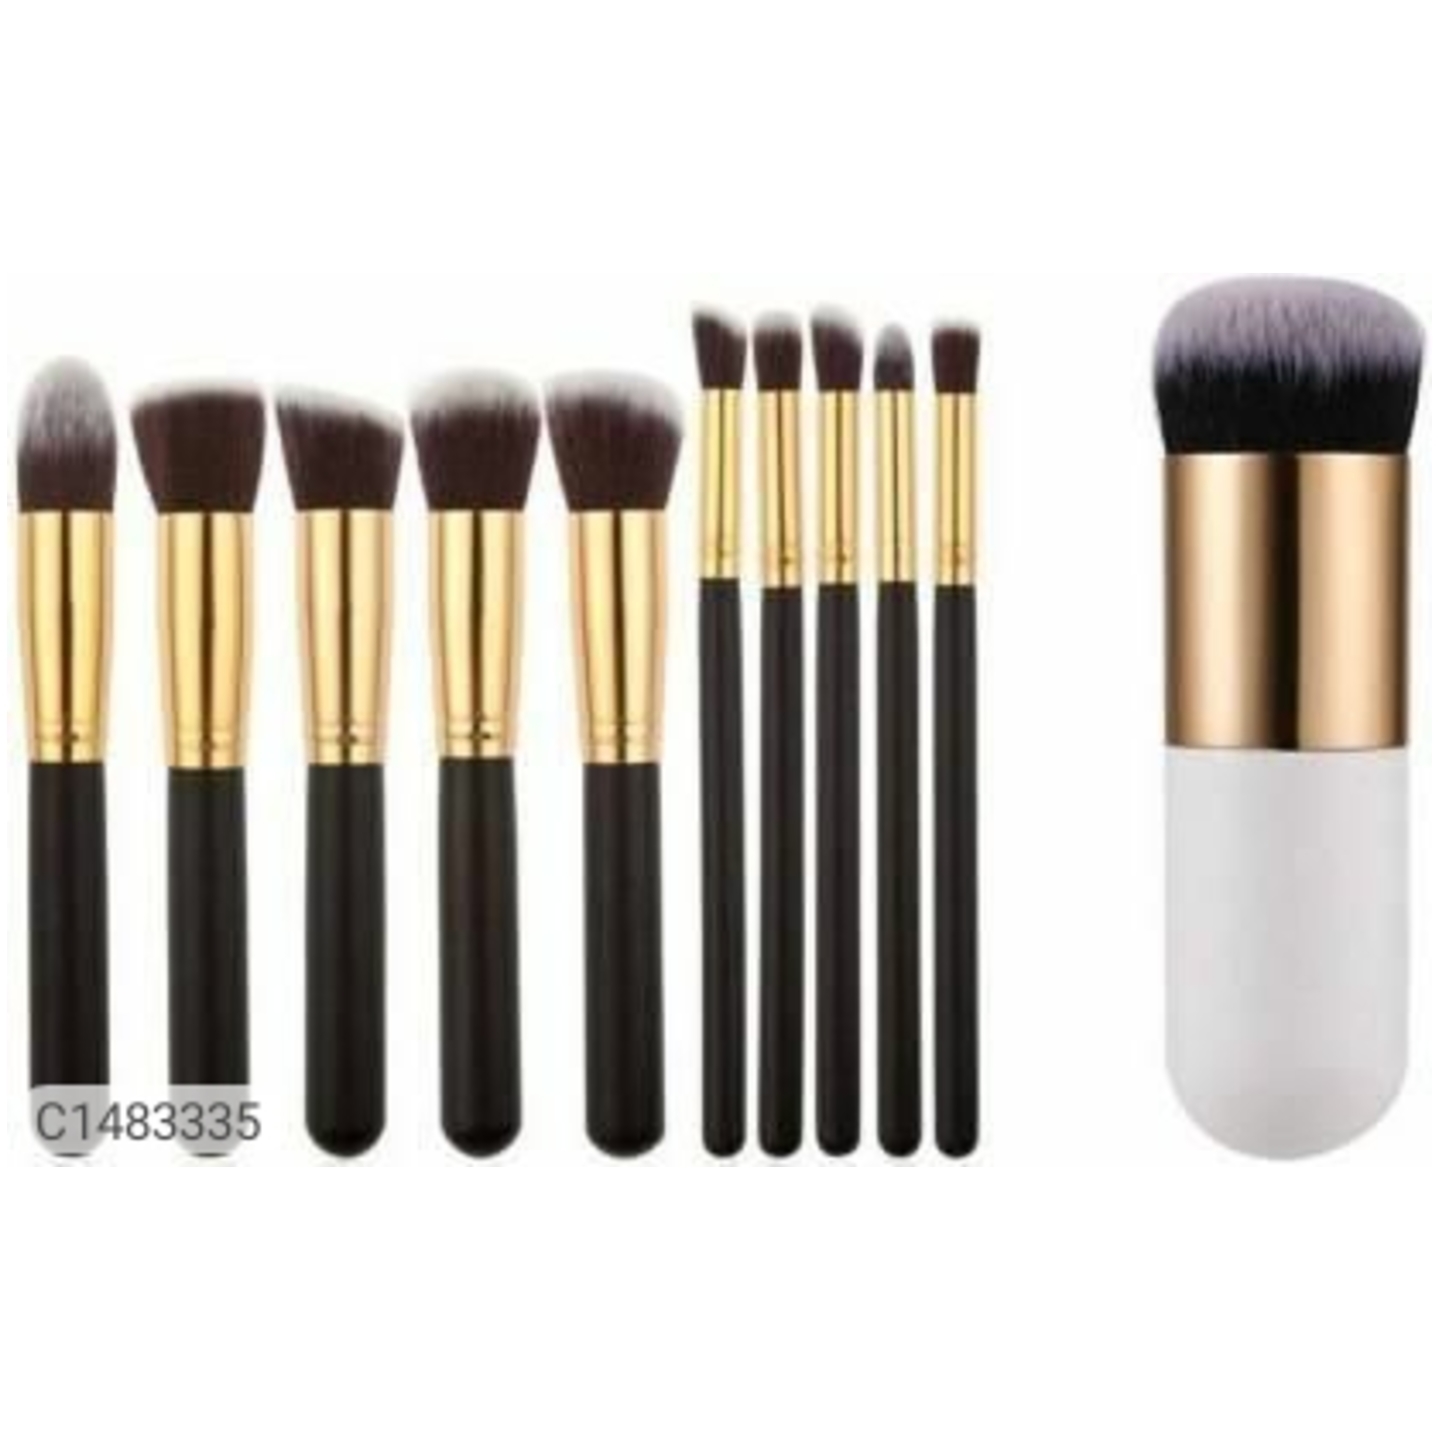 FOUNDATION BRUSH WHITE AND BLACK BRUSH 11  (11 Items in the set)